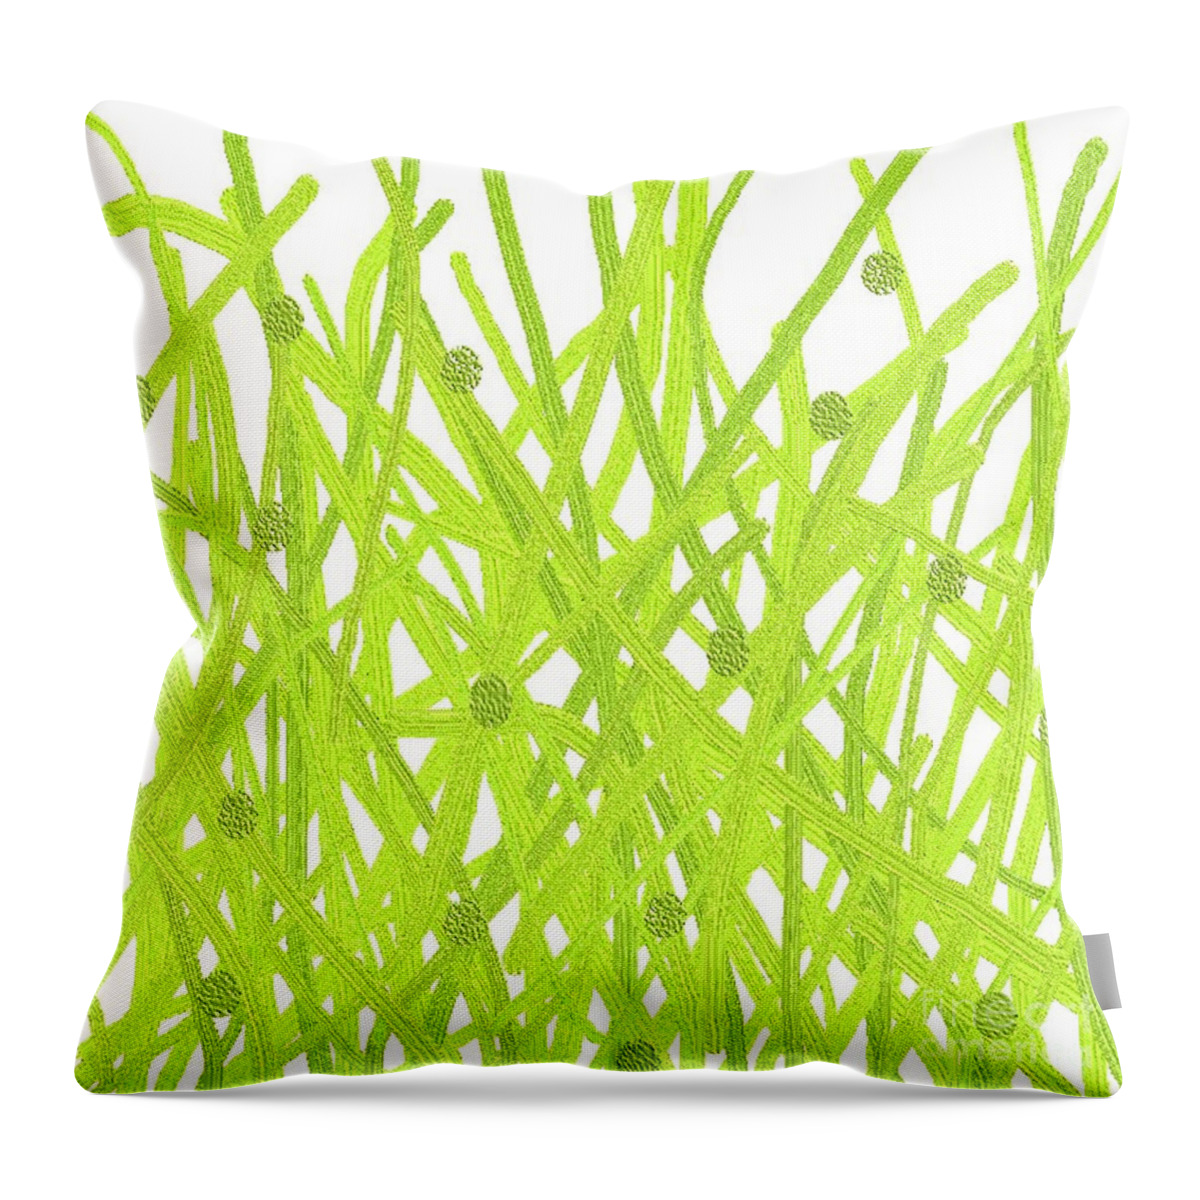 Green Throw Pillow featuring the digital art The Grass Is Greener by Designs By L